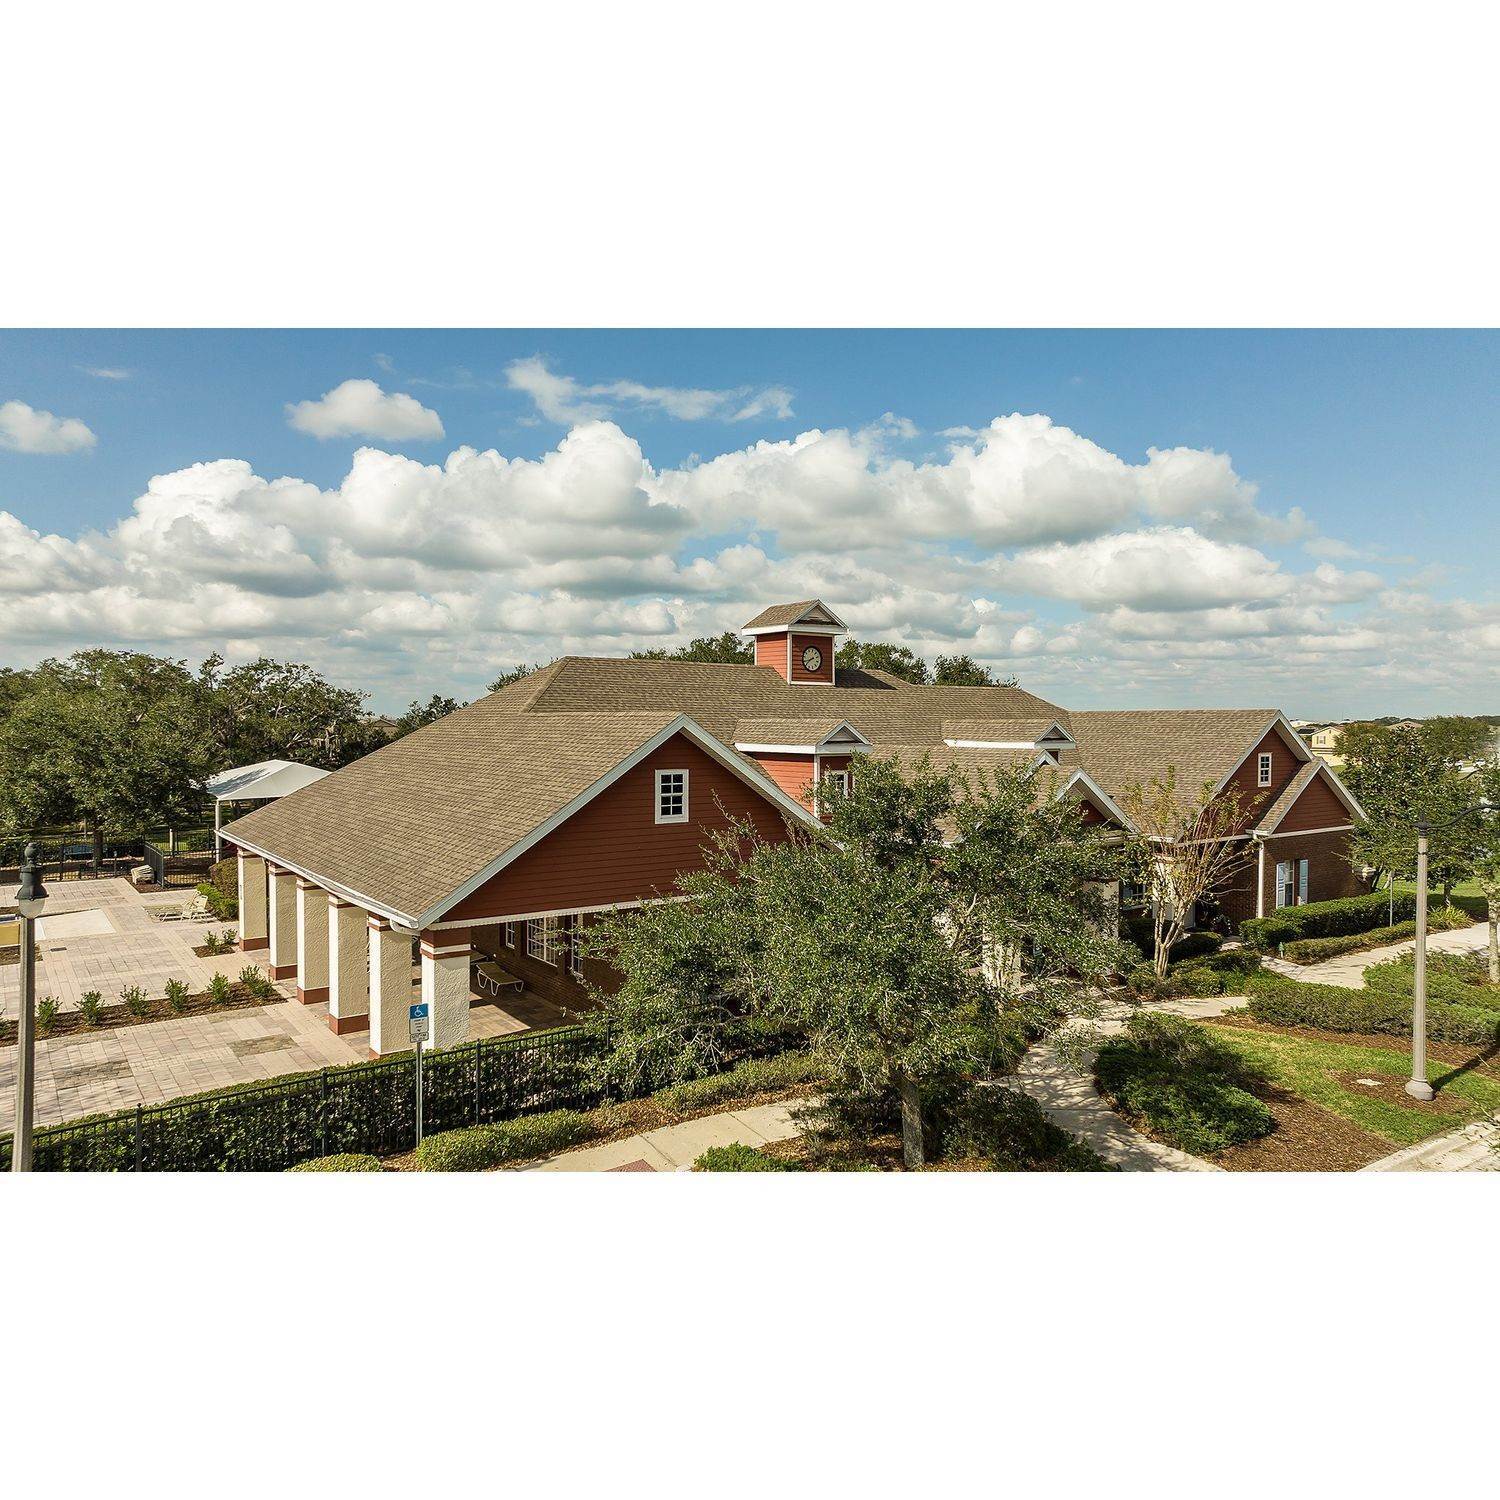 7. The Townhomes at Anthem Park building at 4590 Calvary Way, St. Cloud, FL 34769